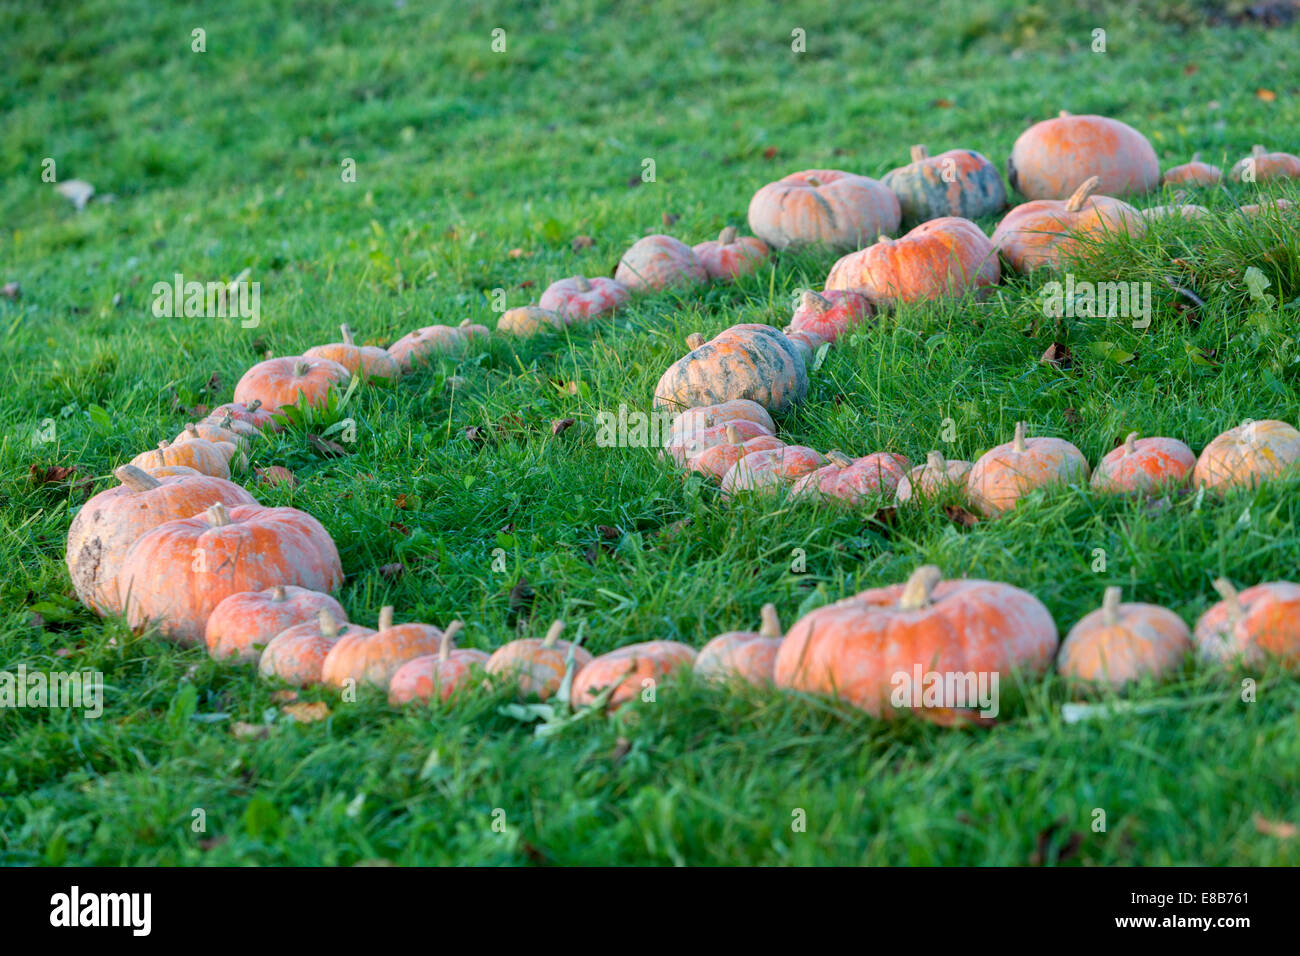 Pumpkin farm, pumpkins stacked in lines on the ground Stock Photo